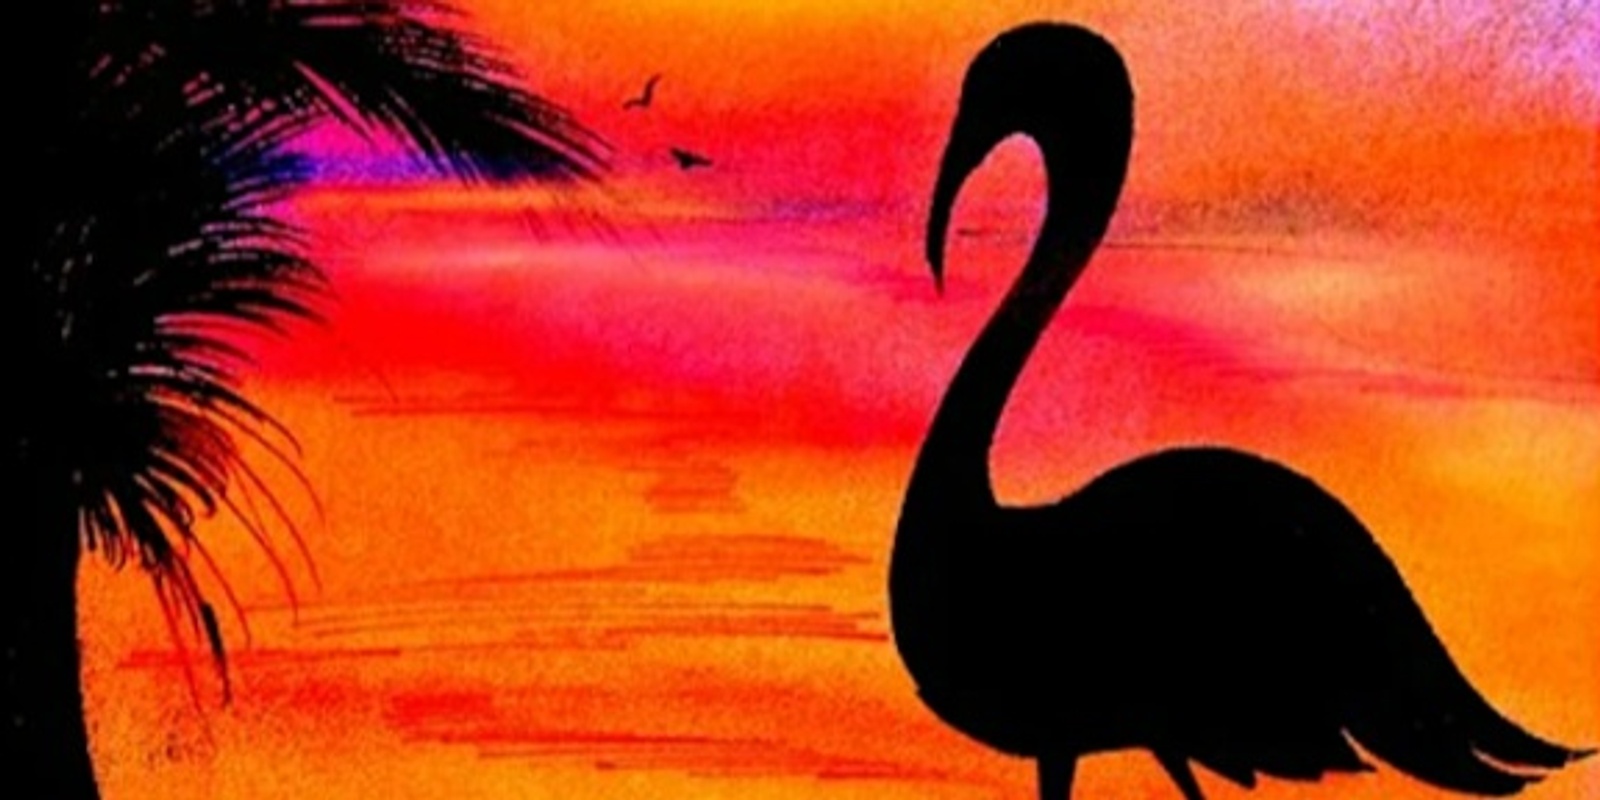 Casino Kids Painting Class Flamingo on 10th July - Creative Kids Vouchers Expire 30th June 23 - So Book Now!